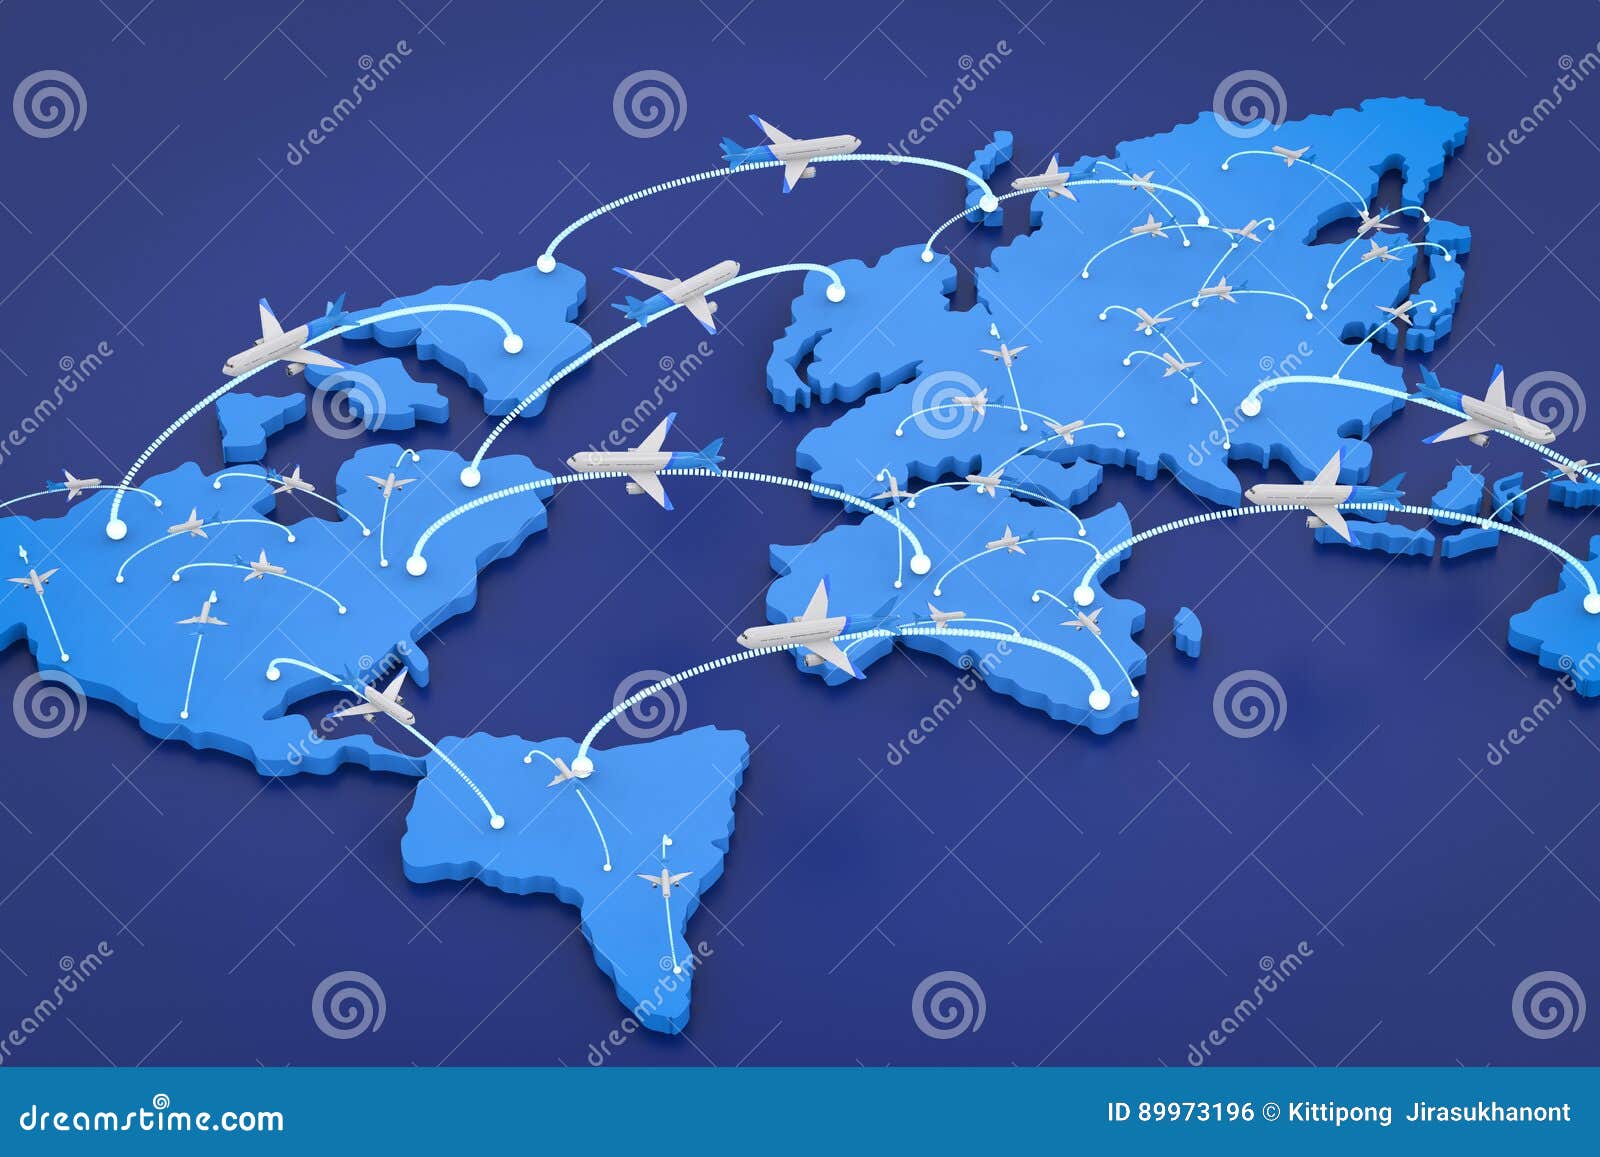 flight route with world map